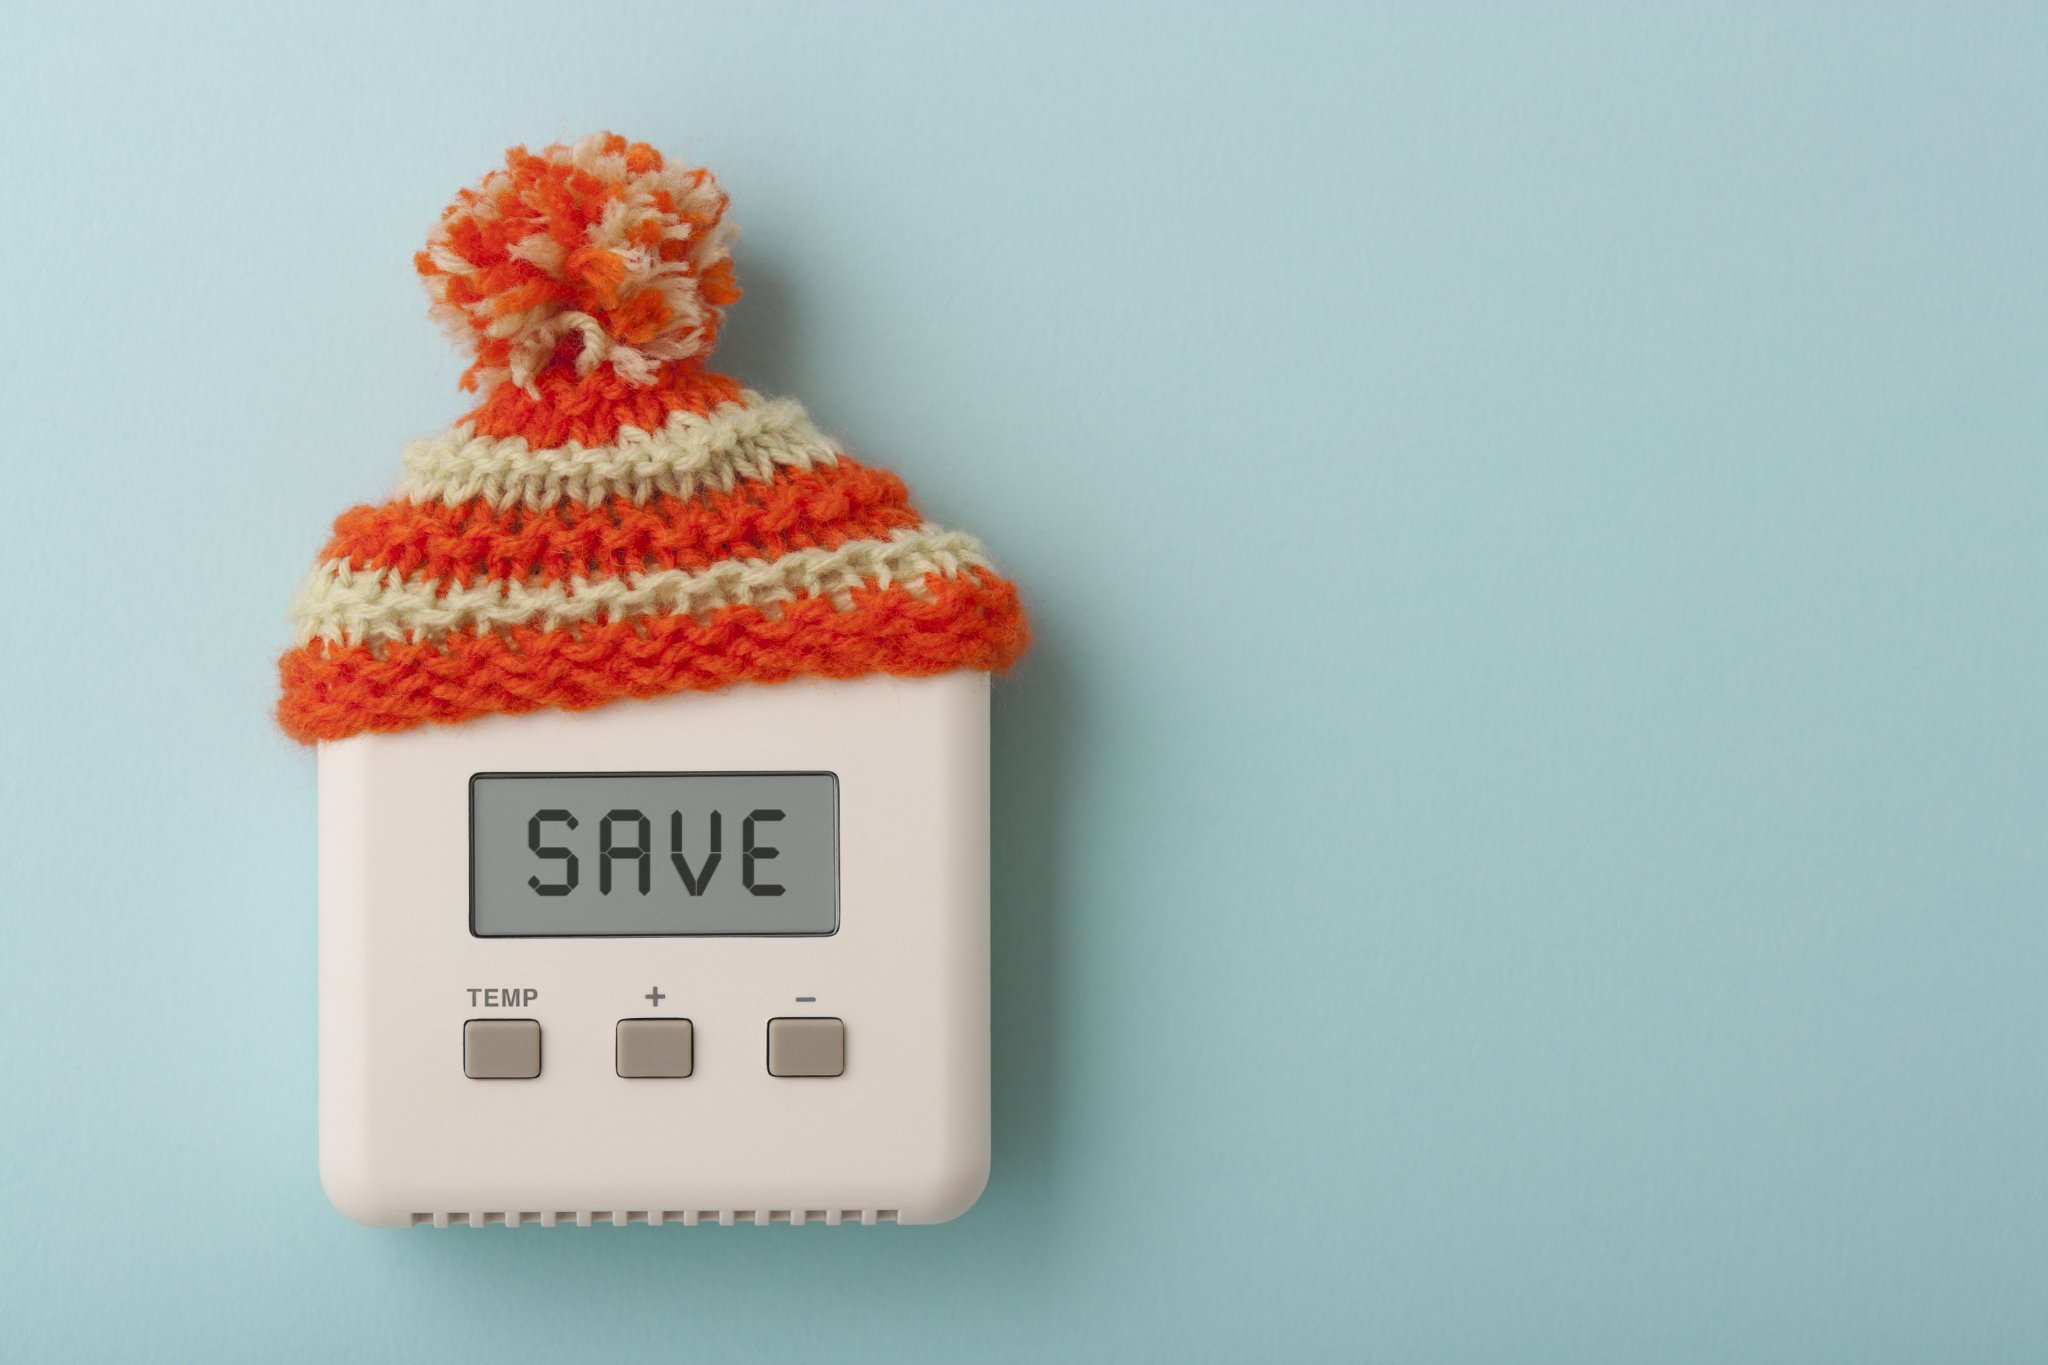 The word SAVE on a digital room thermostat wearing wooly hat.